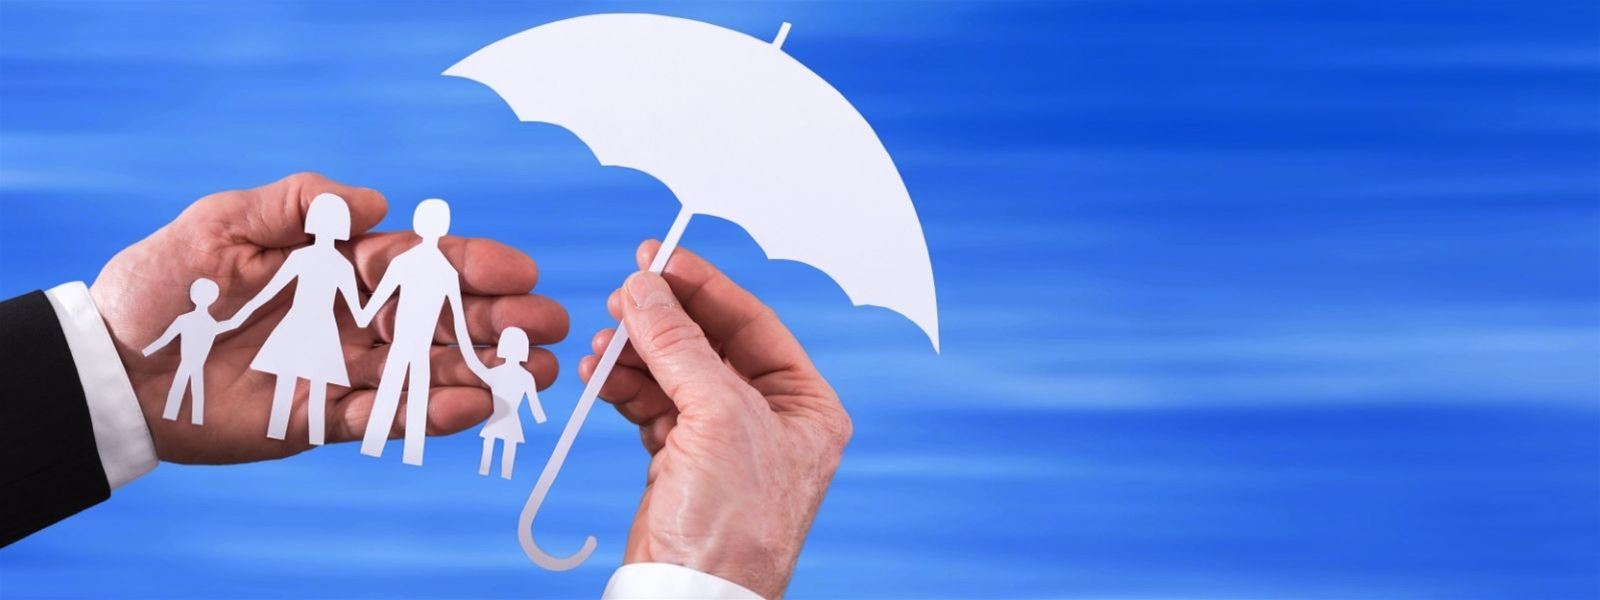 What Is Not Covered Under an Umbrella Insurance Policy?